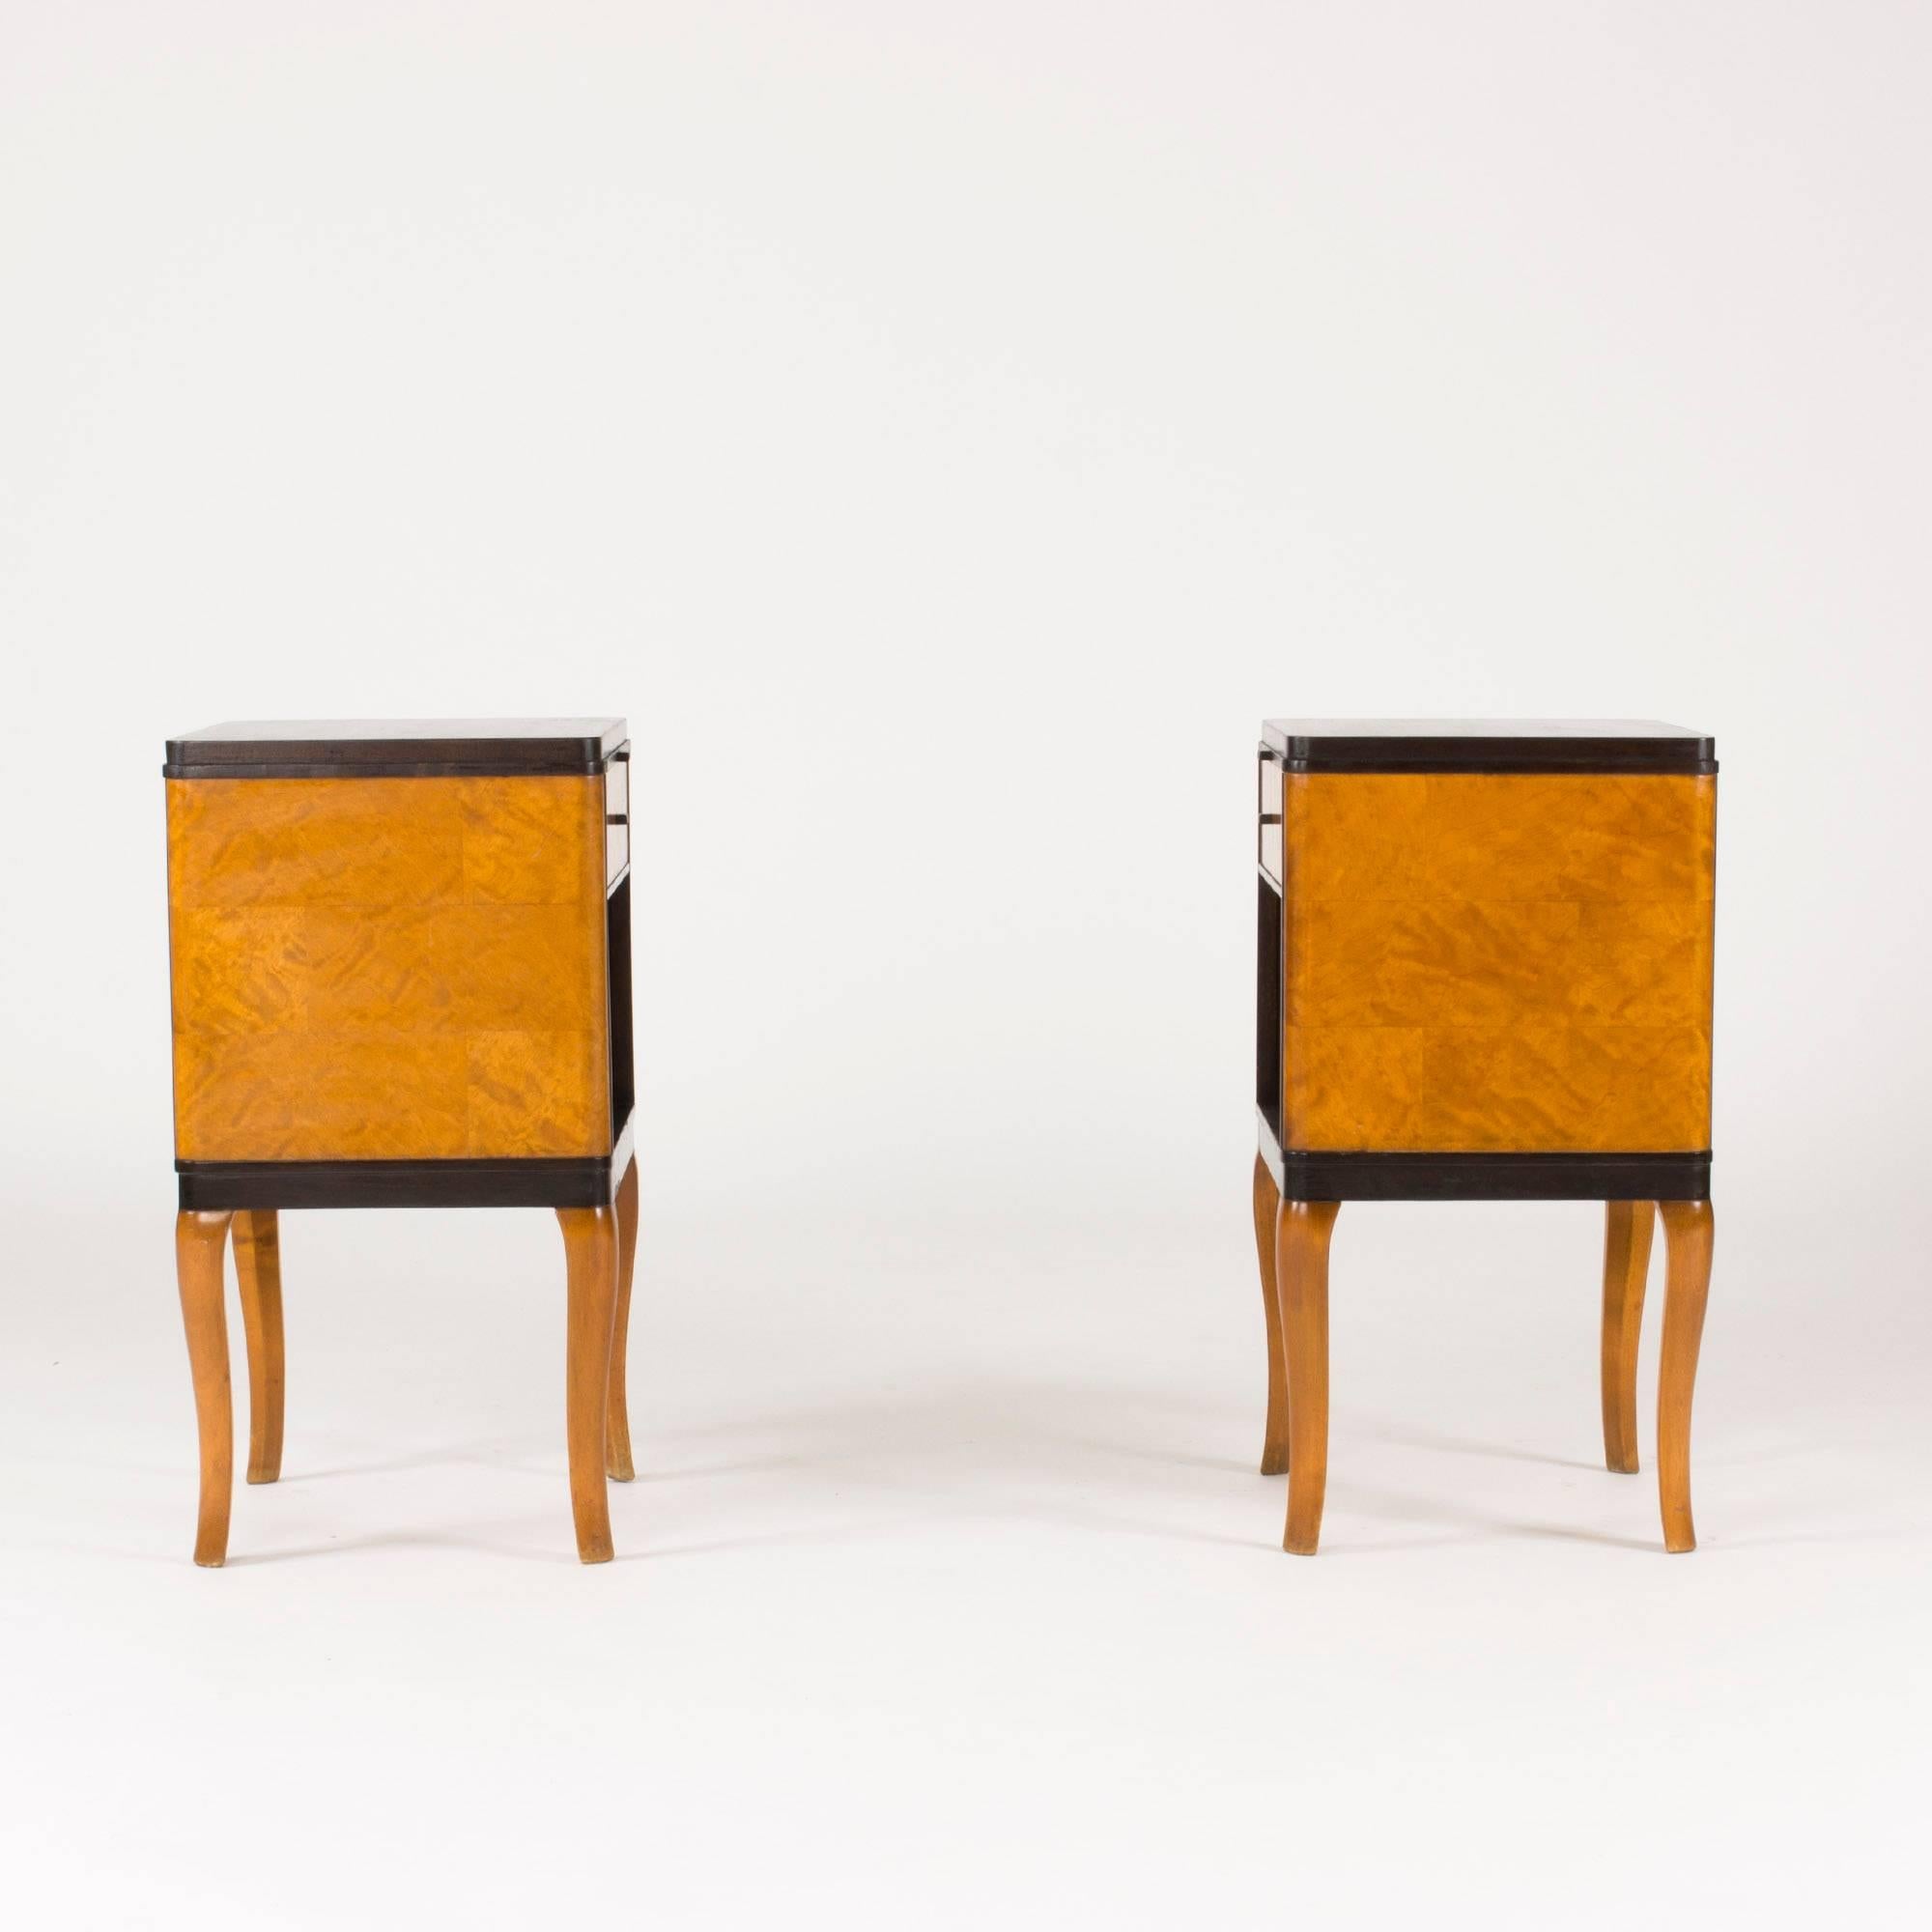 Pair of beautiful bedside tables by Carl Malmsten, model named “Haga”. Made in alder root and stained birch. On the sides the wood is layered in a checkered pattern. Curved legs connoting neoclassicism.